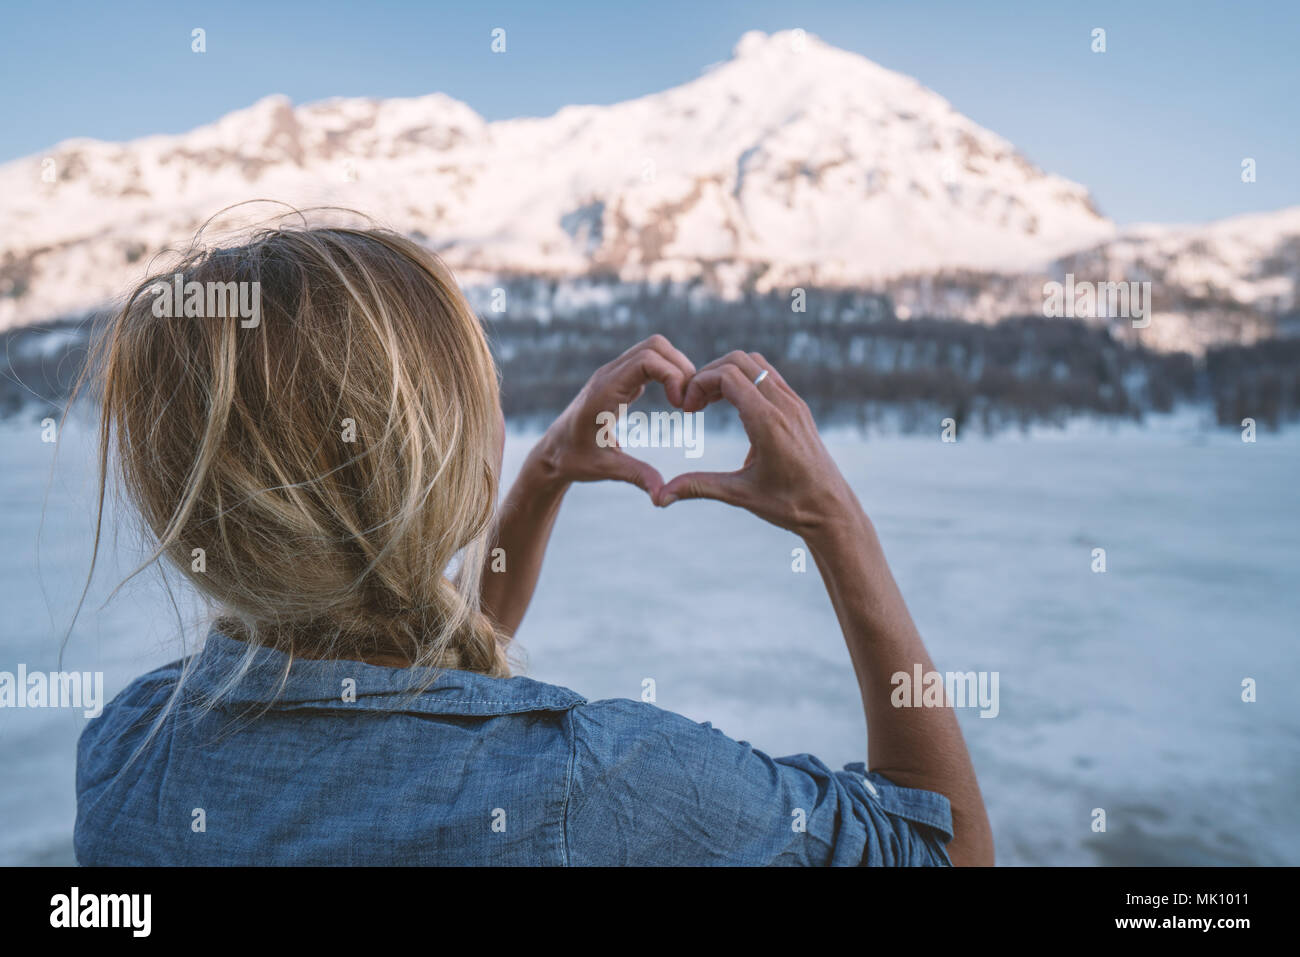 Young woman making a heart shape finger frame over frozen lake and snowcapped mountains. People love nature environment concept. Shot in Switzerland Stock Photo